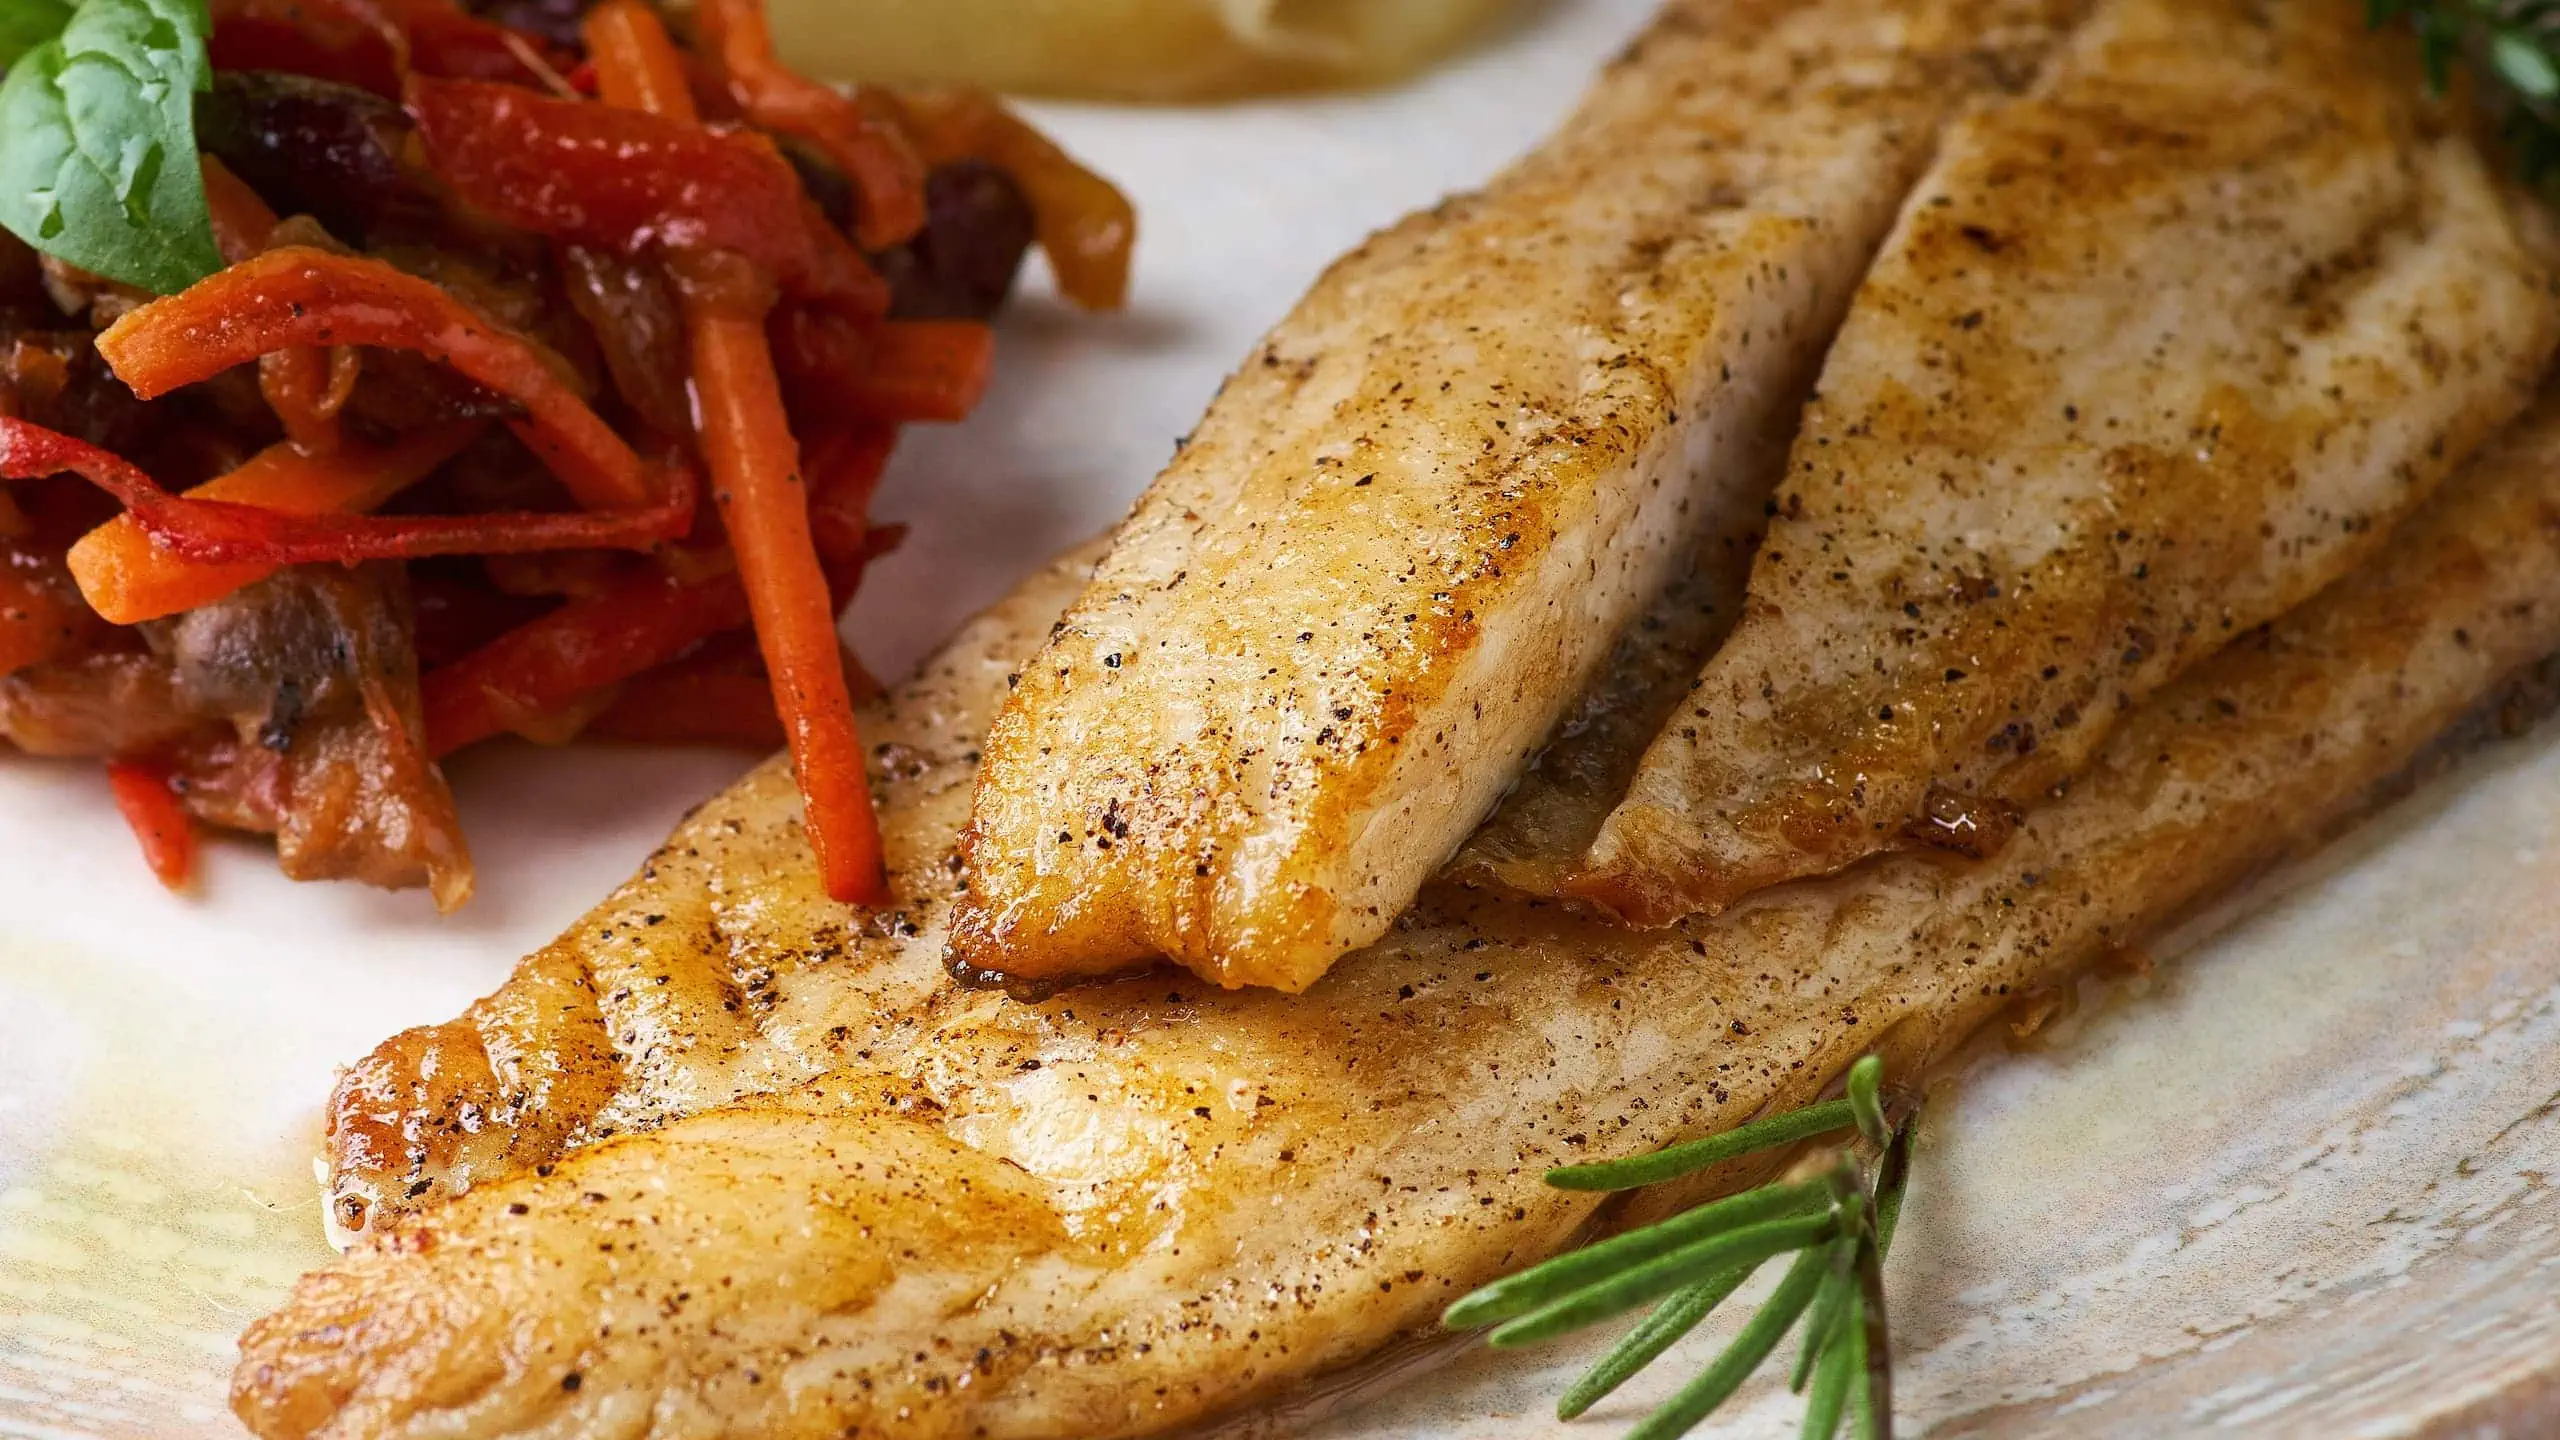 Our version of speckled trout recipe